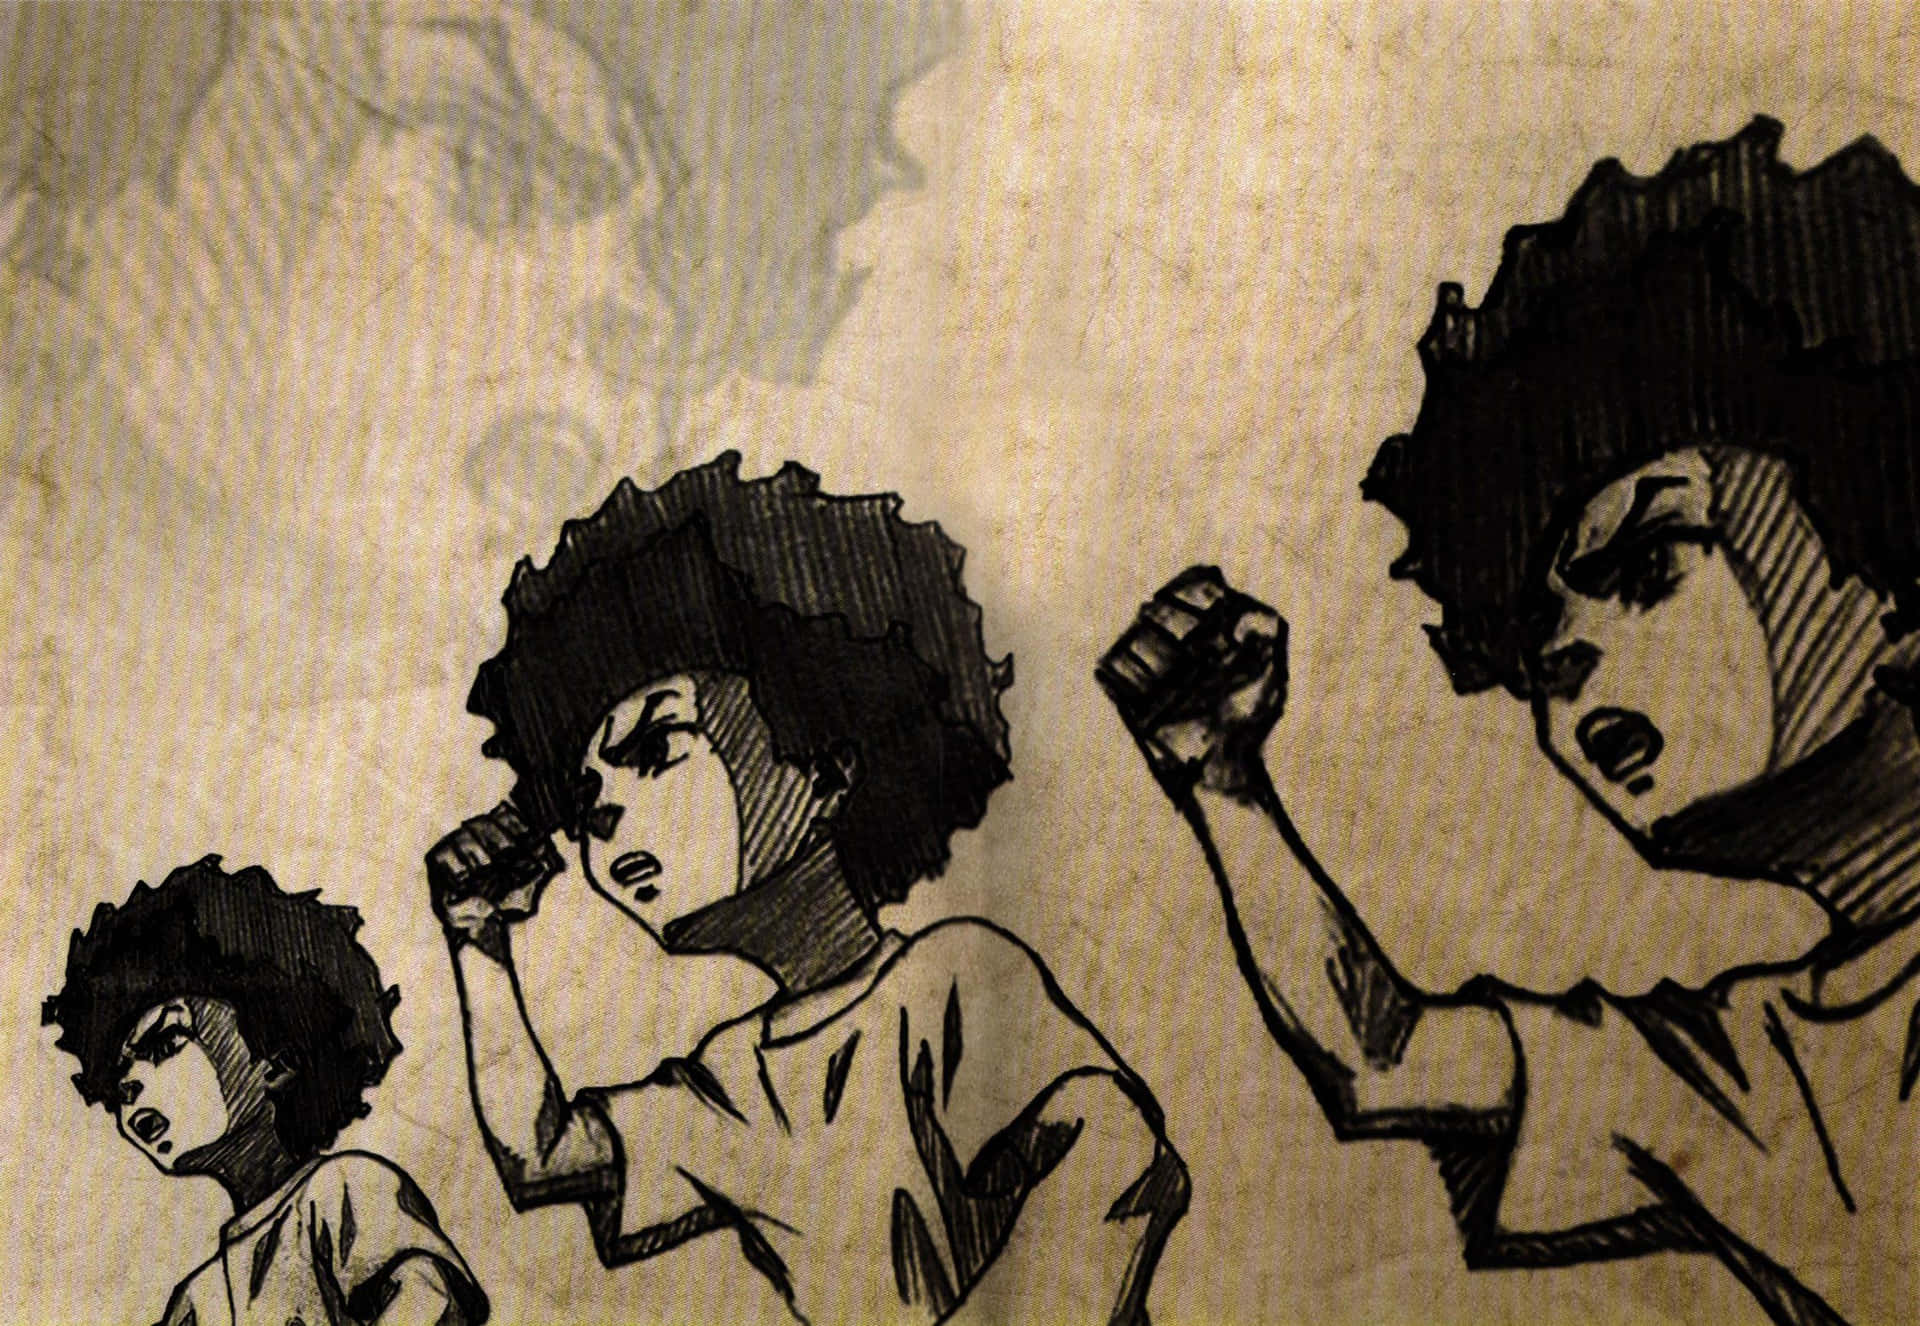 Black Power, the rallying cry for the civil rights movement" Wallpaper